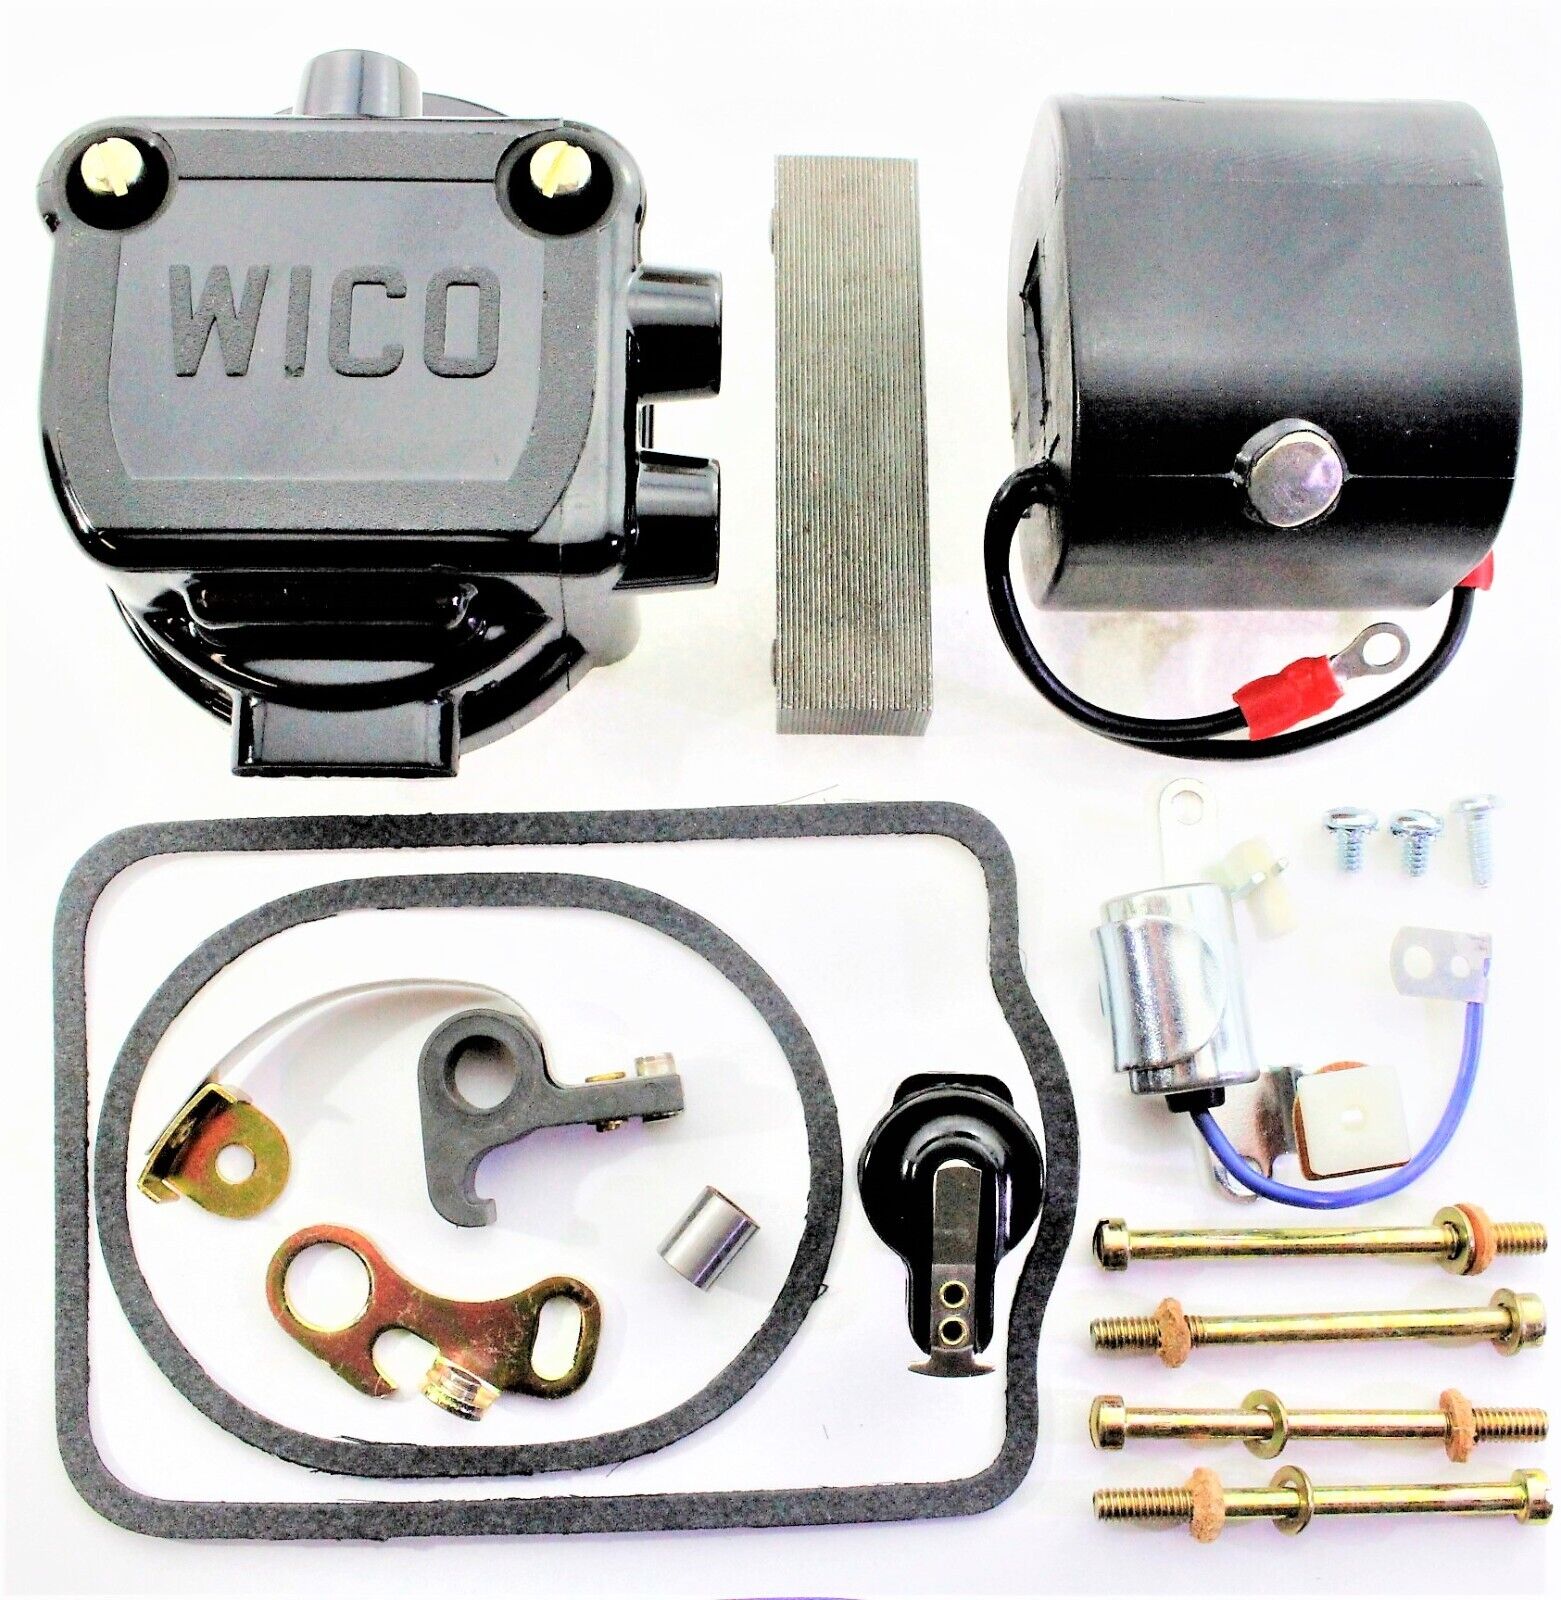 WICO C Magneto Kit with Coil fit John Deere tractor A B D G H spec 477B 1042 DW5